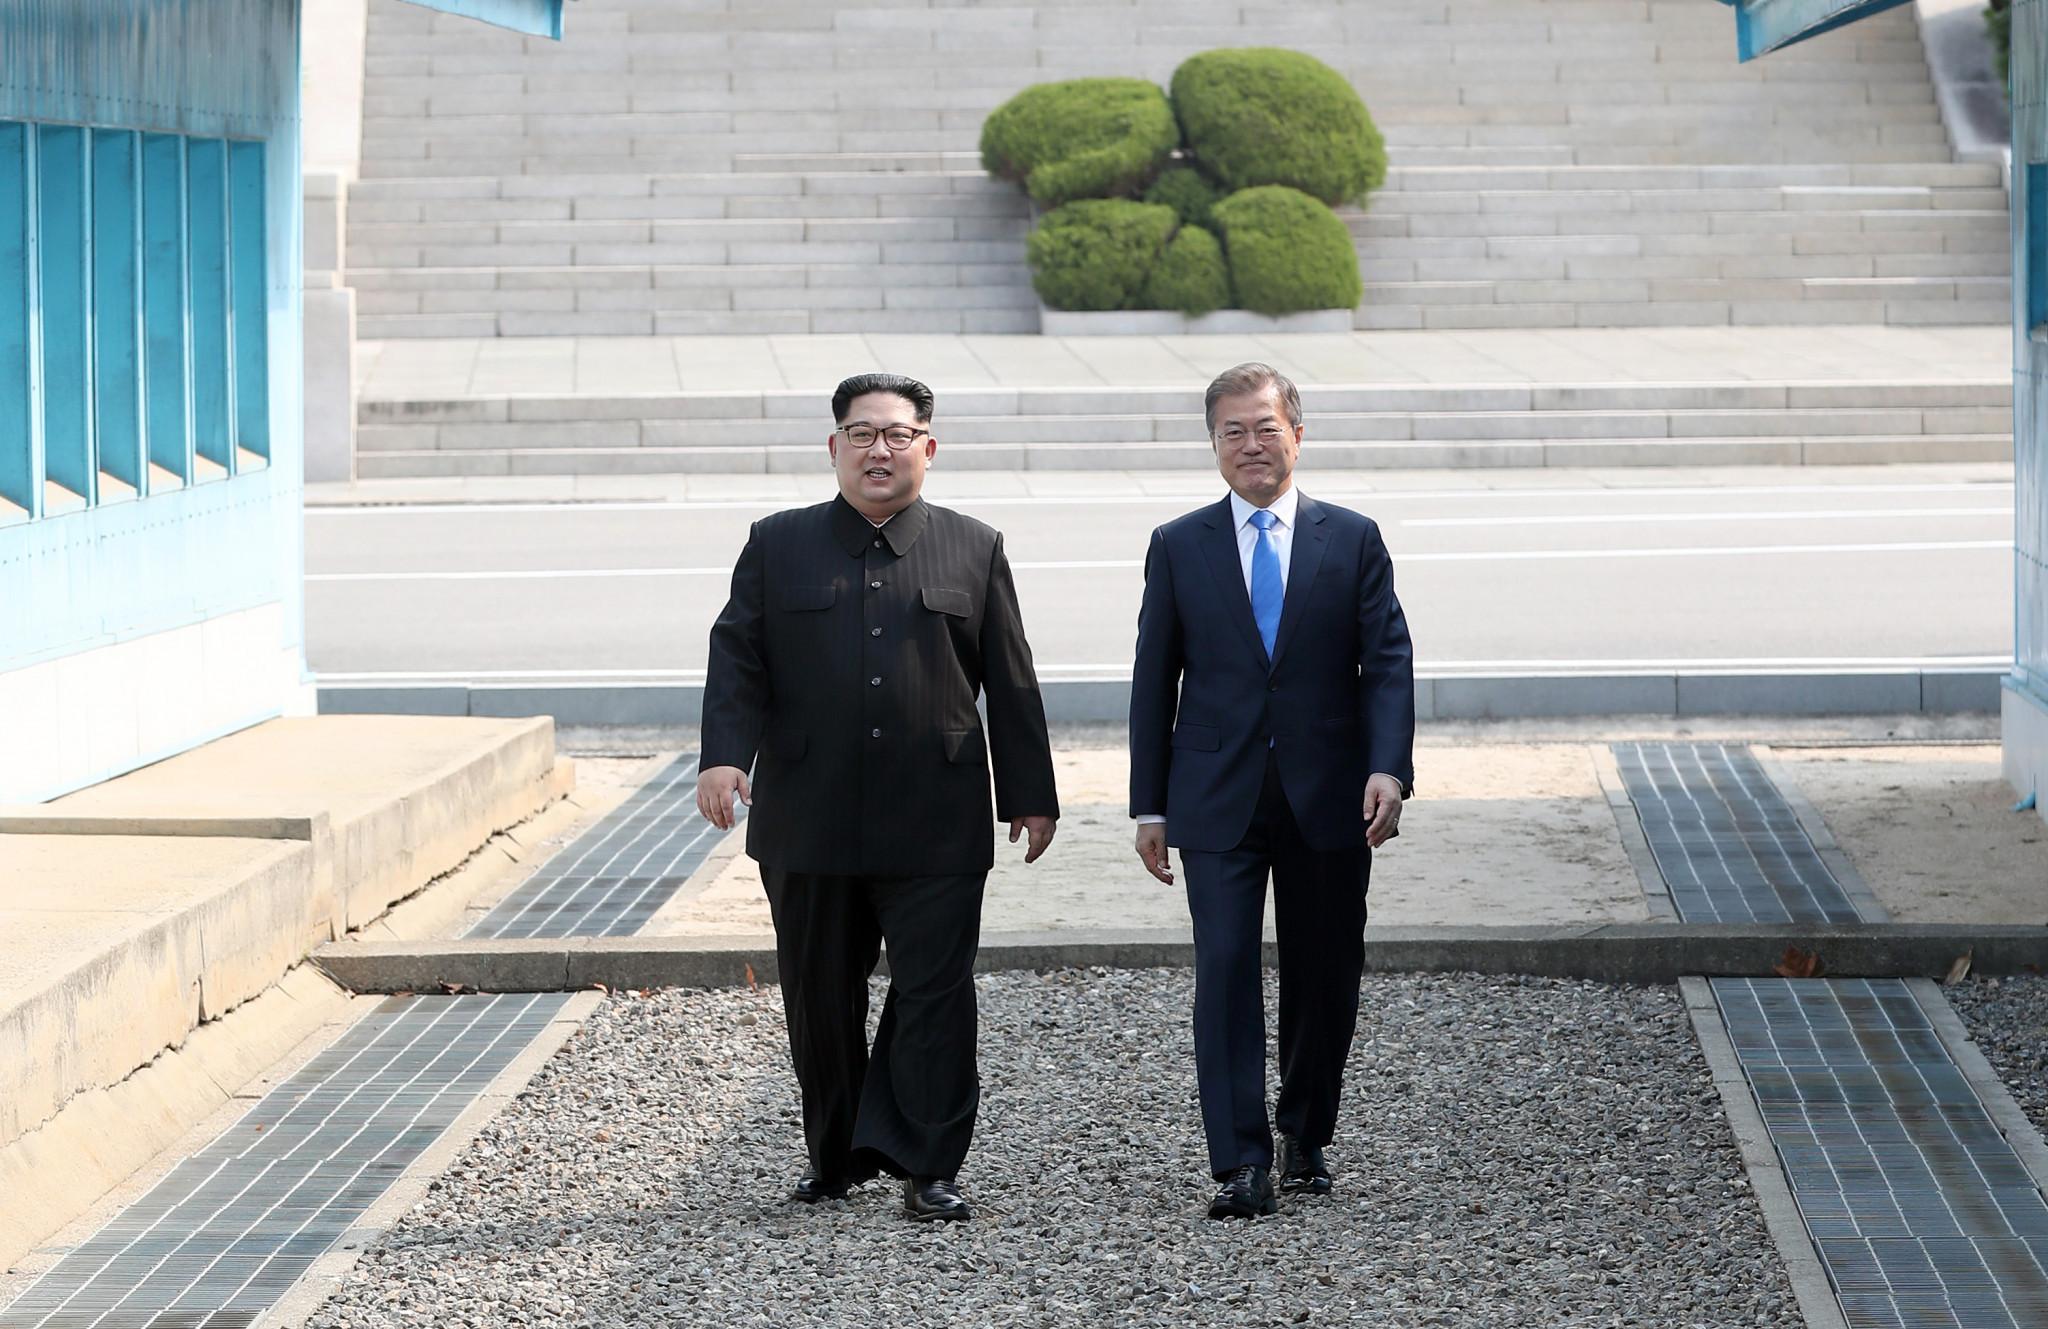 In another sign of thawing relations, in April Kim Jong Un became the first North Korean leader to visit the South since the end of the Korean War in 1953 ©Getty Images